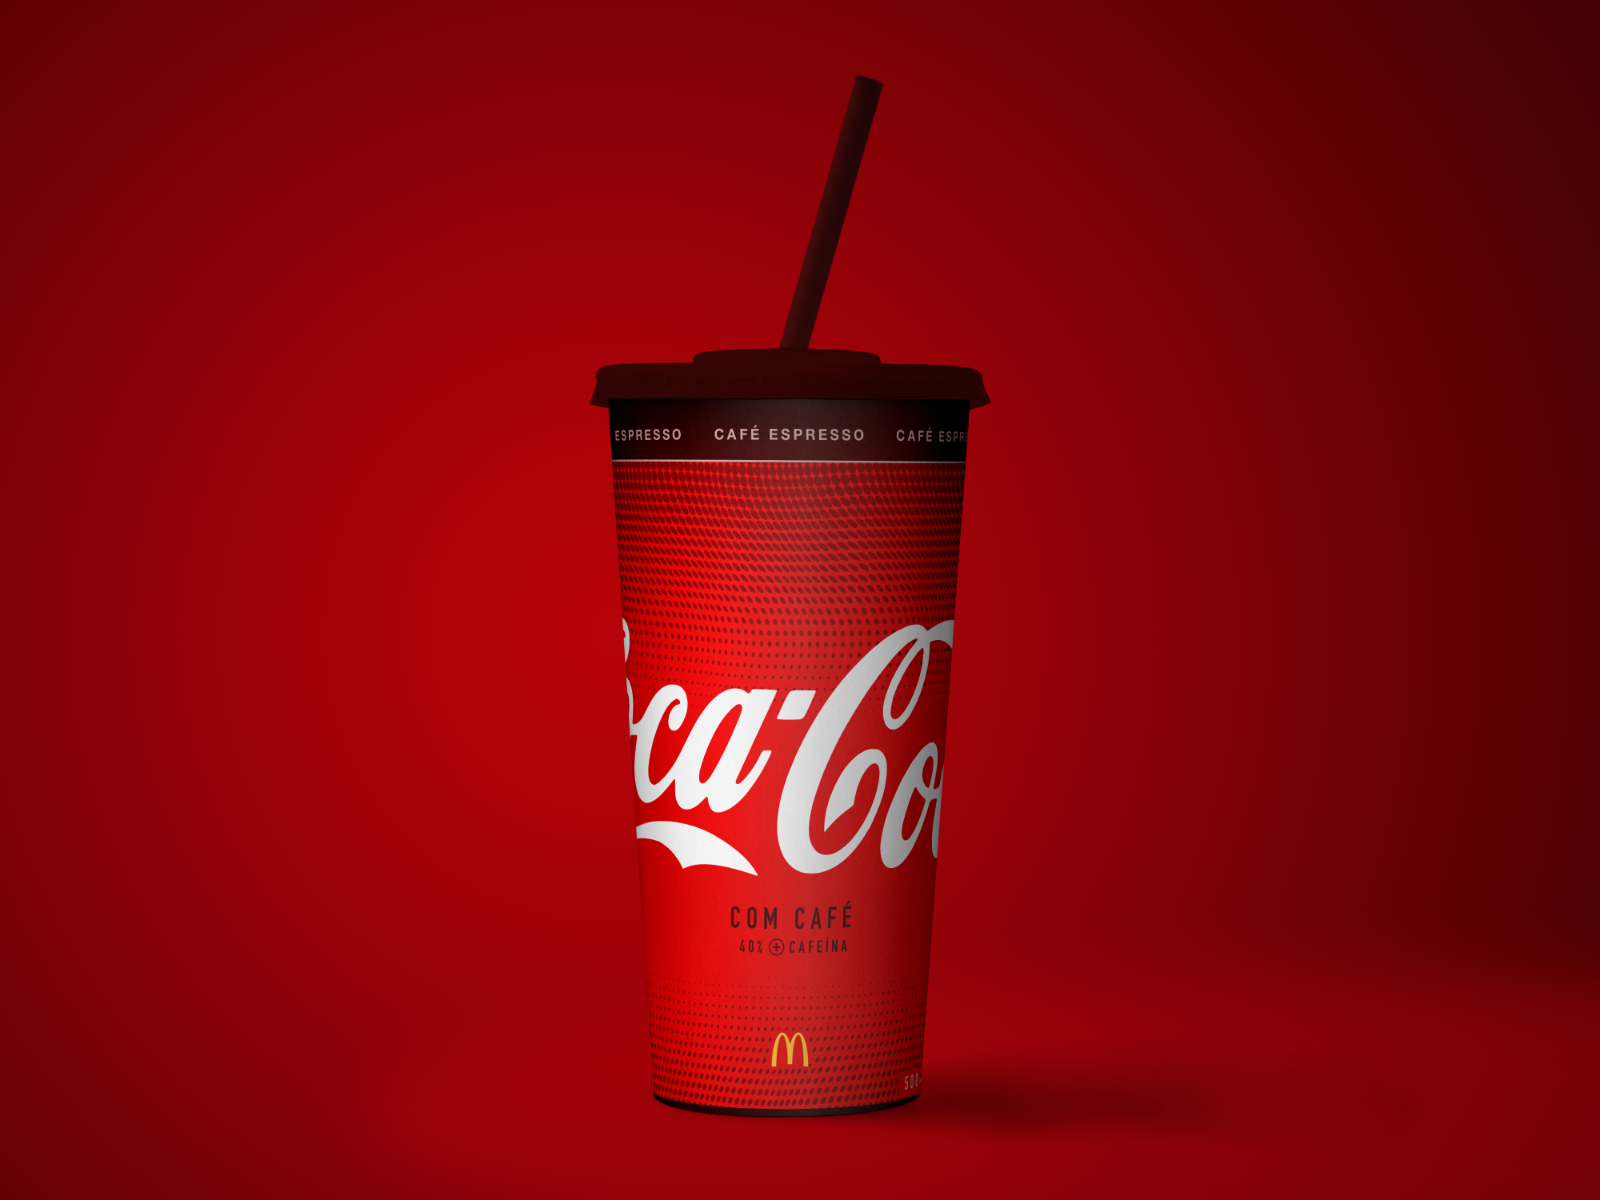 Coca-Cola Paper Cups Concept by Silas Augusto on Dribbble